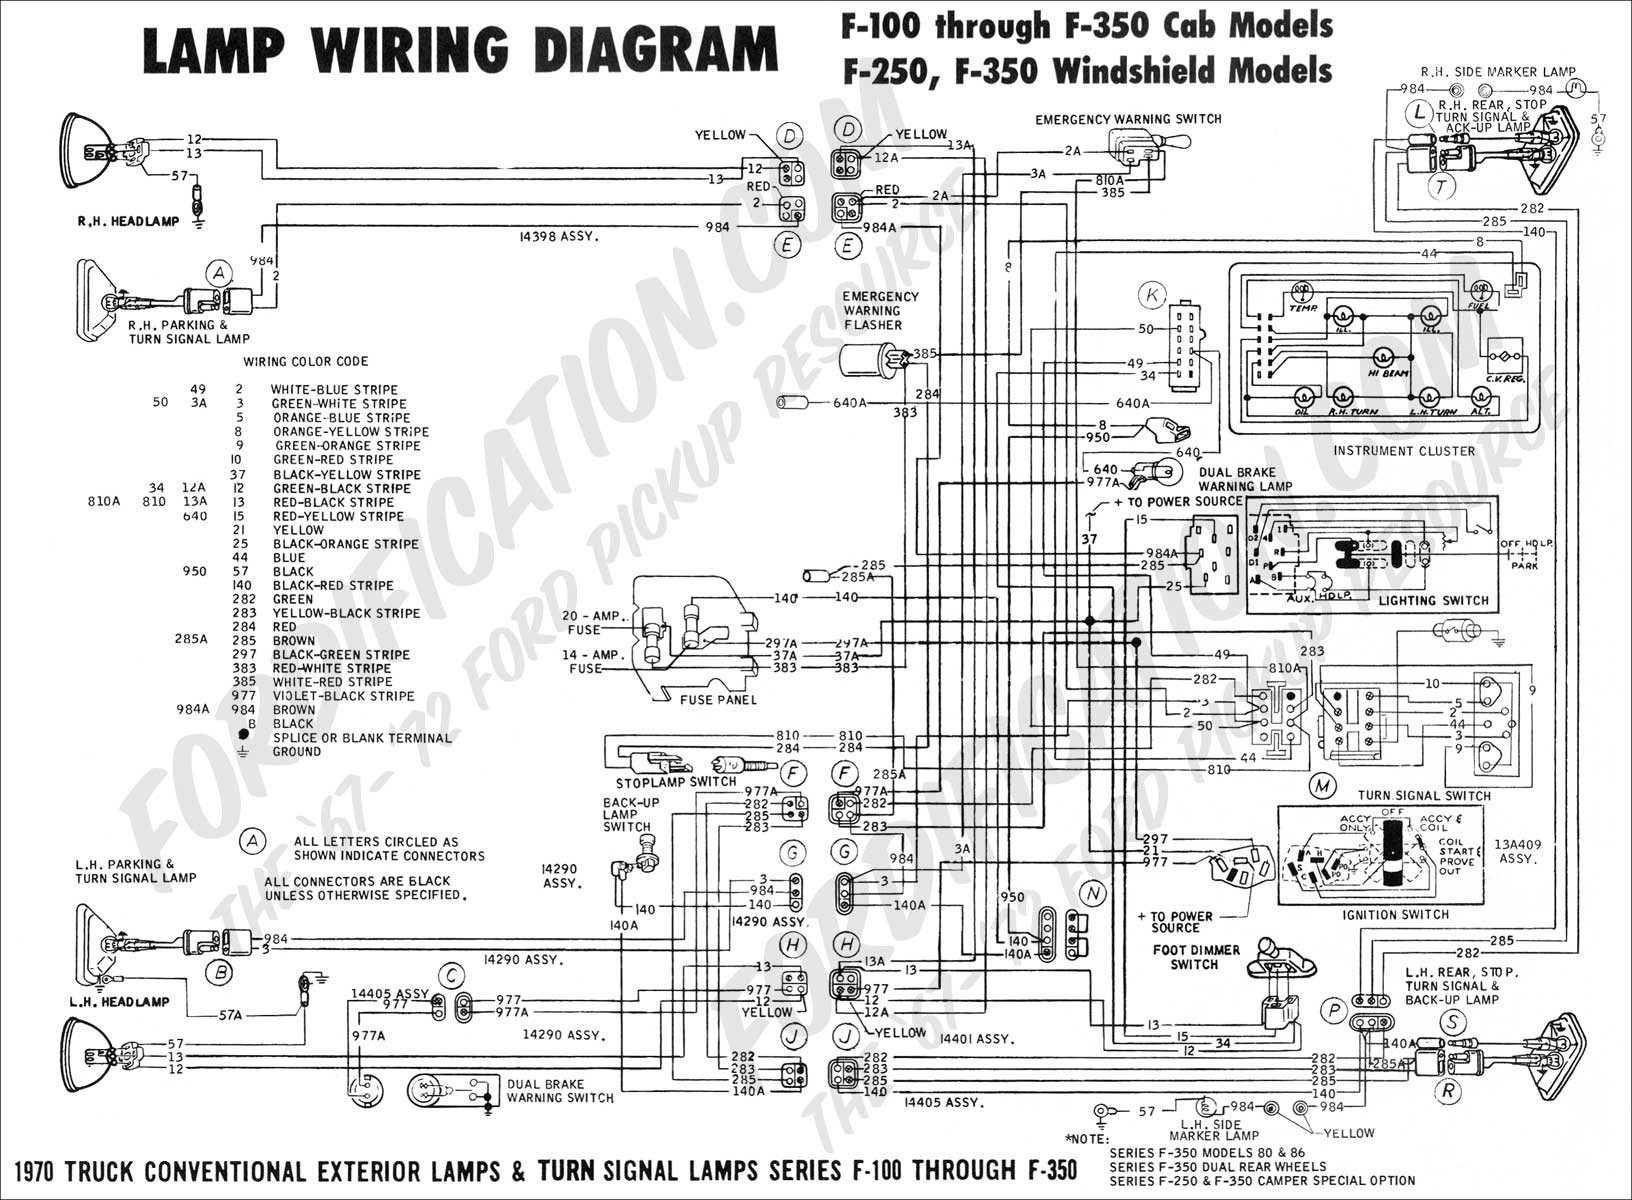 Trailer Wire Harness Diagram ford F700 Wiring Diagrams Additionally Dodge Under Hood Wiring Of Trailer Wire Harness Diagram